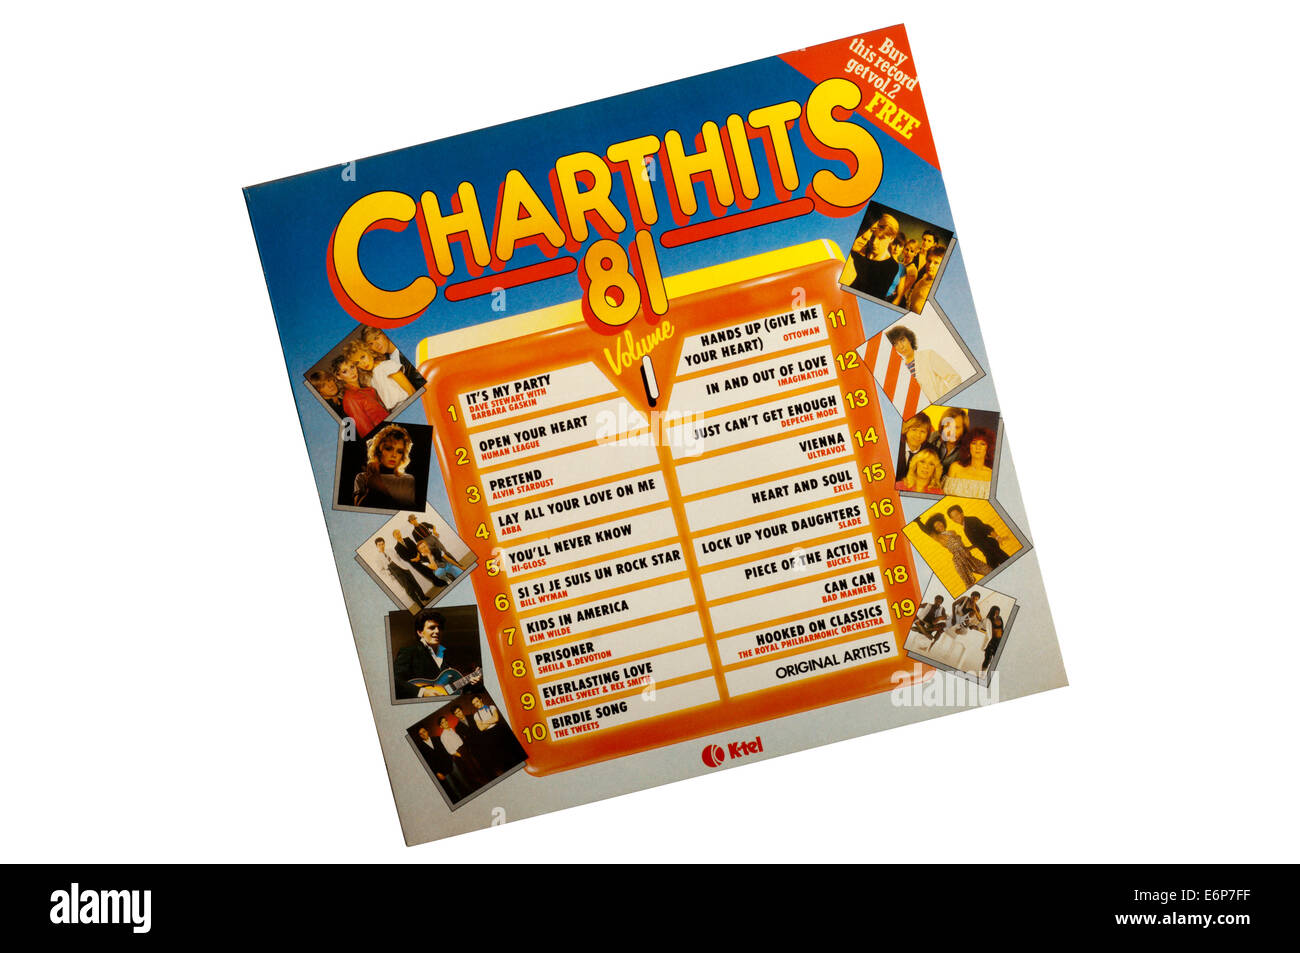 Chart Hits 81 Volume 1 was a compilation album released by K-Tel in 1981. Stock Photo